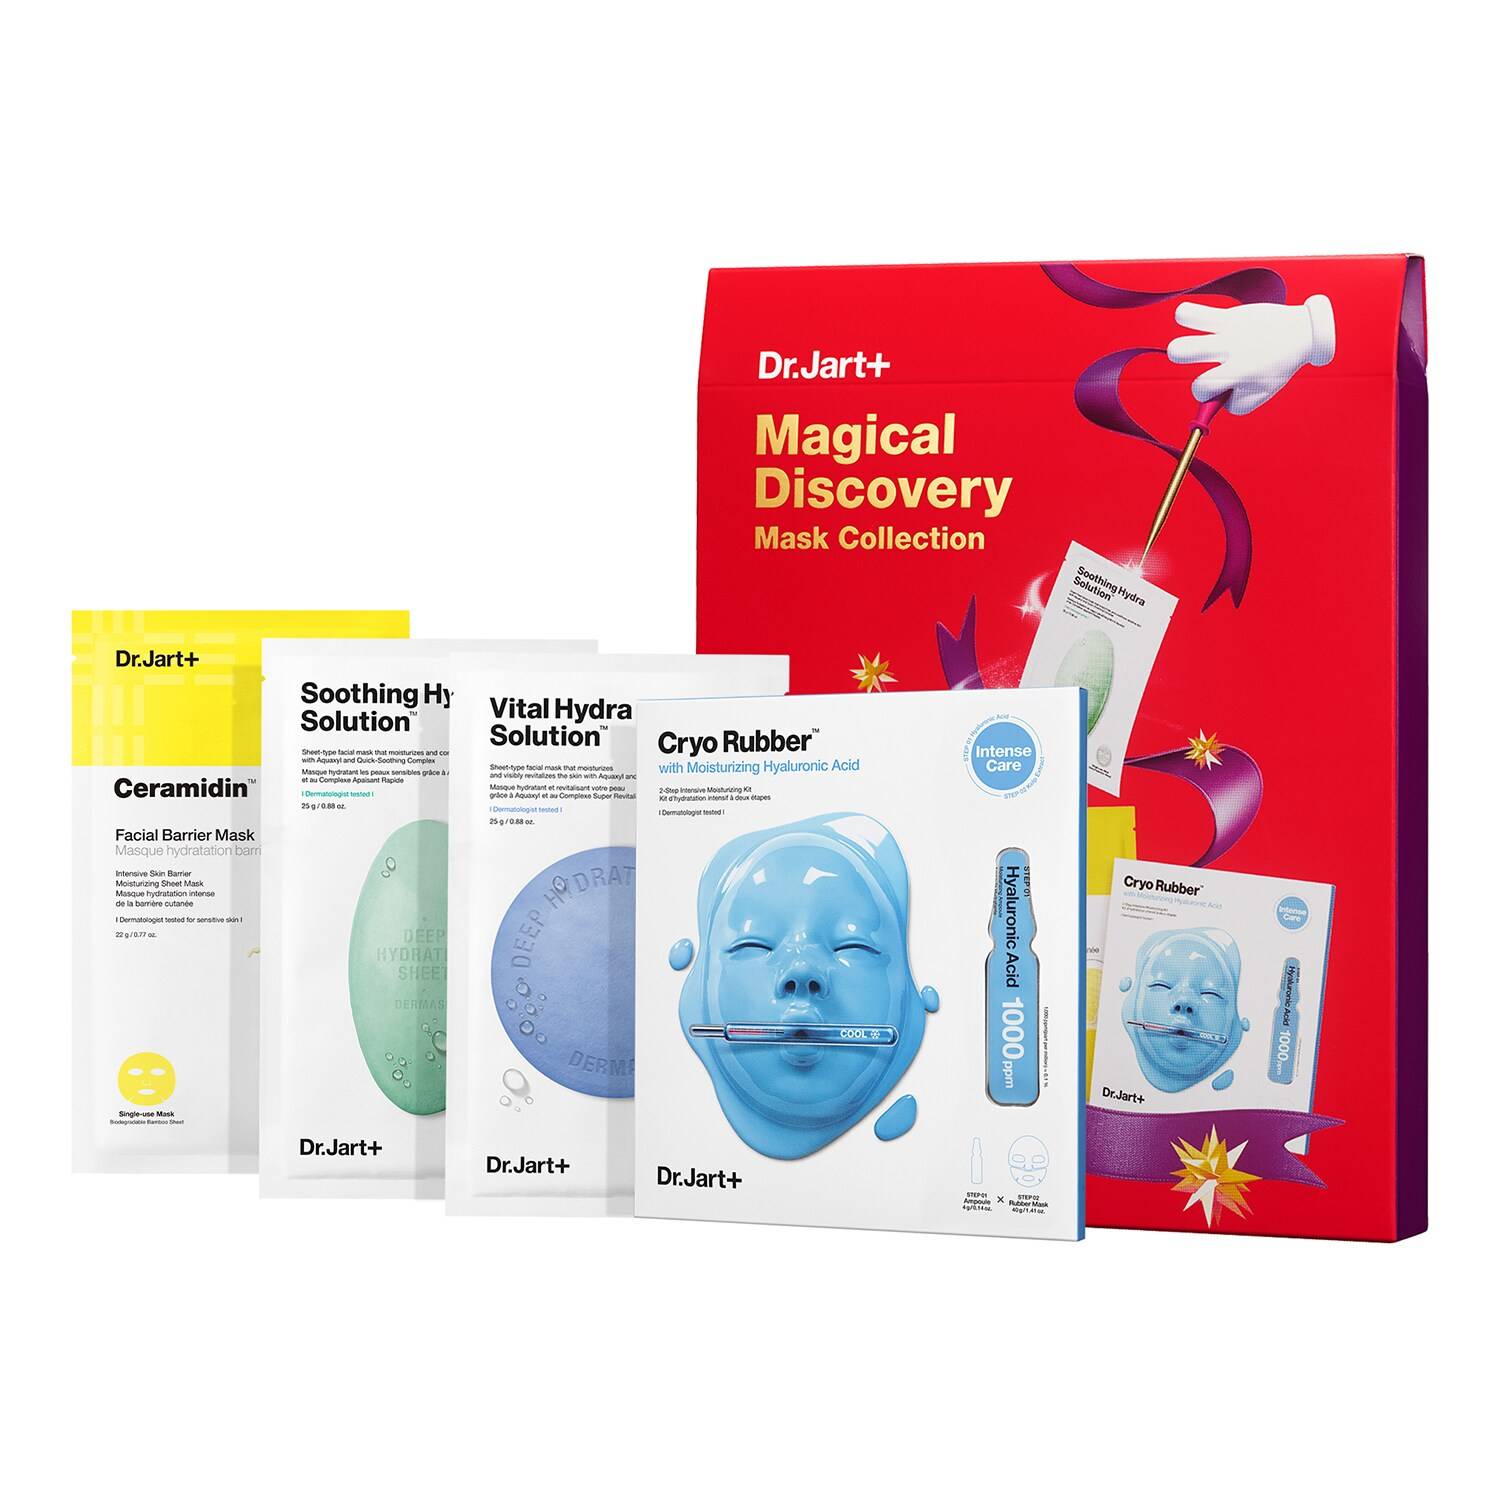 Dr.Jart+ Magical Discovery Mask Collection